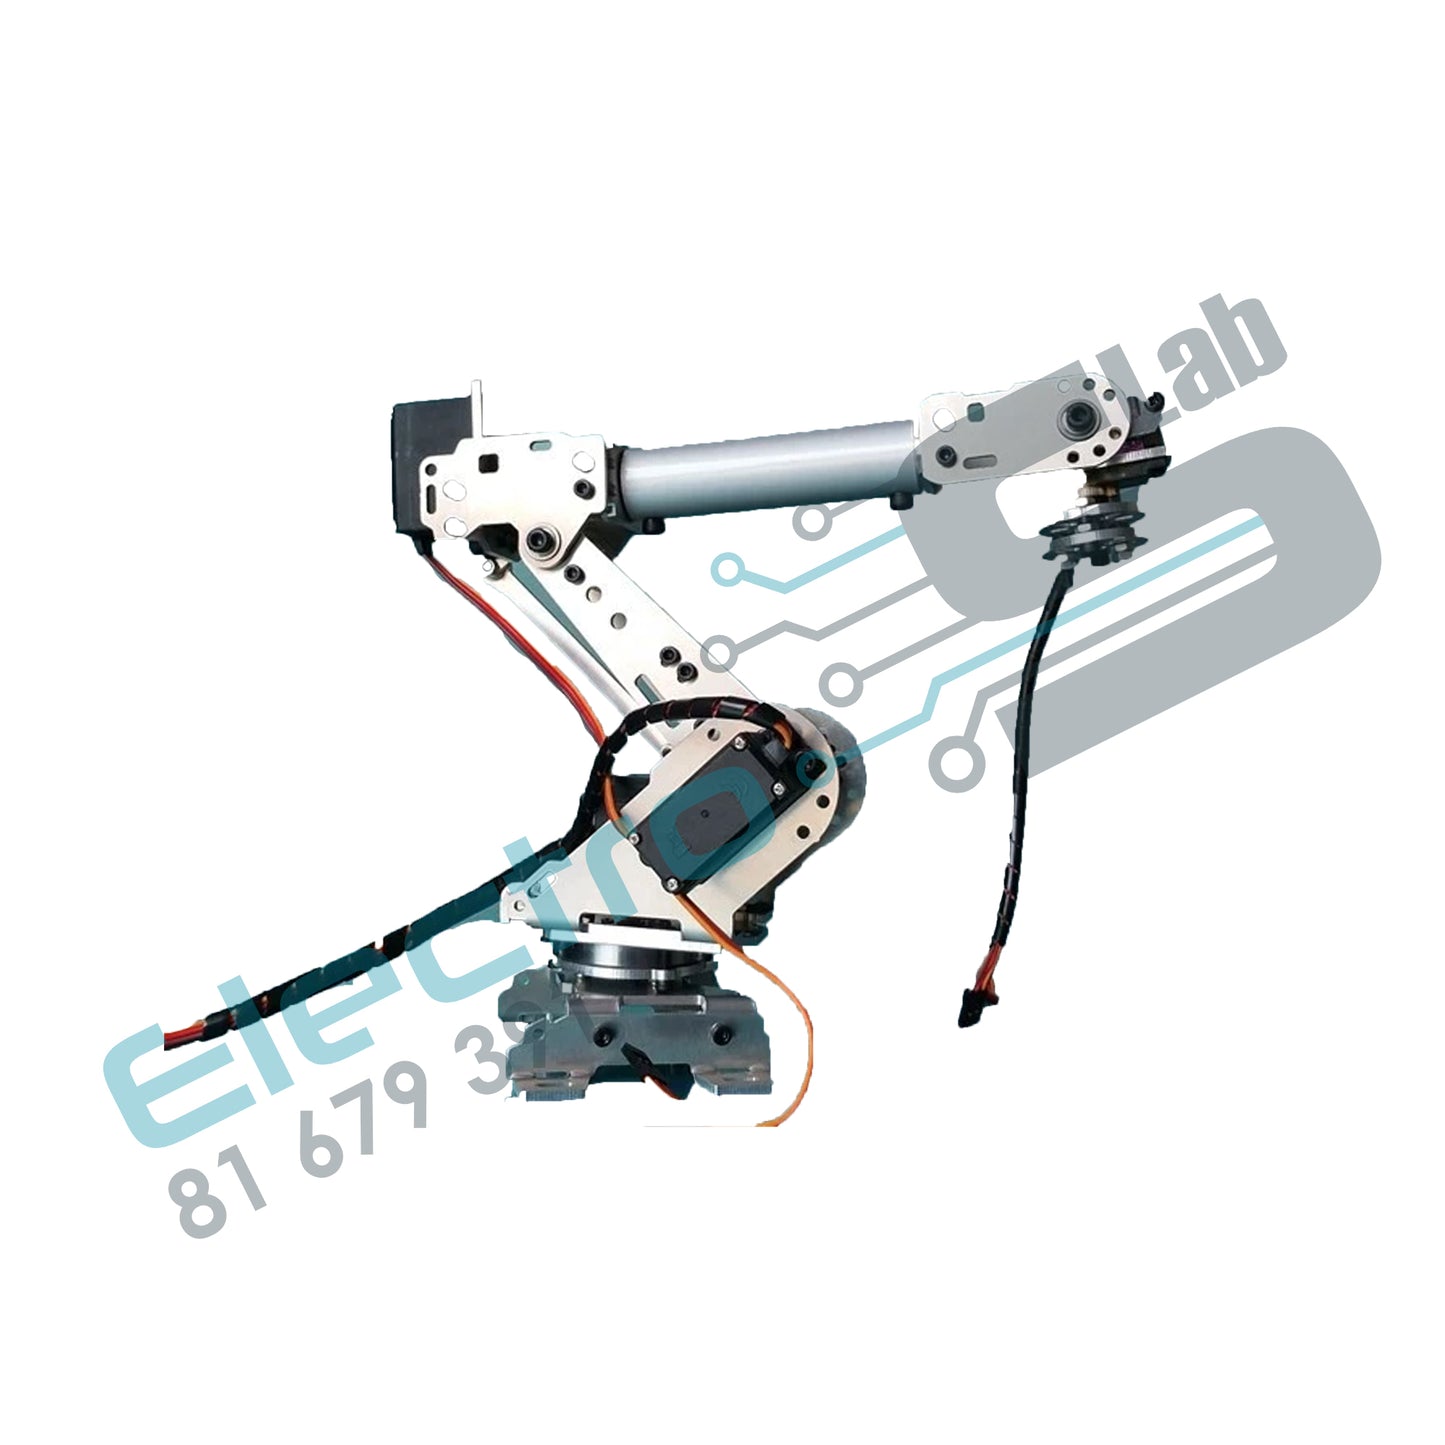 Multi Degree  Of Freedom Robotic Arm(Without Servo And Not Assembled)